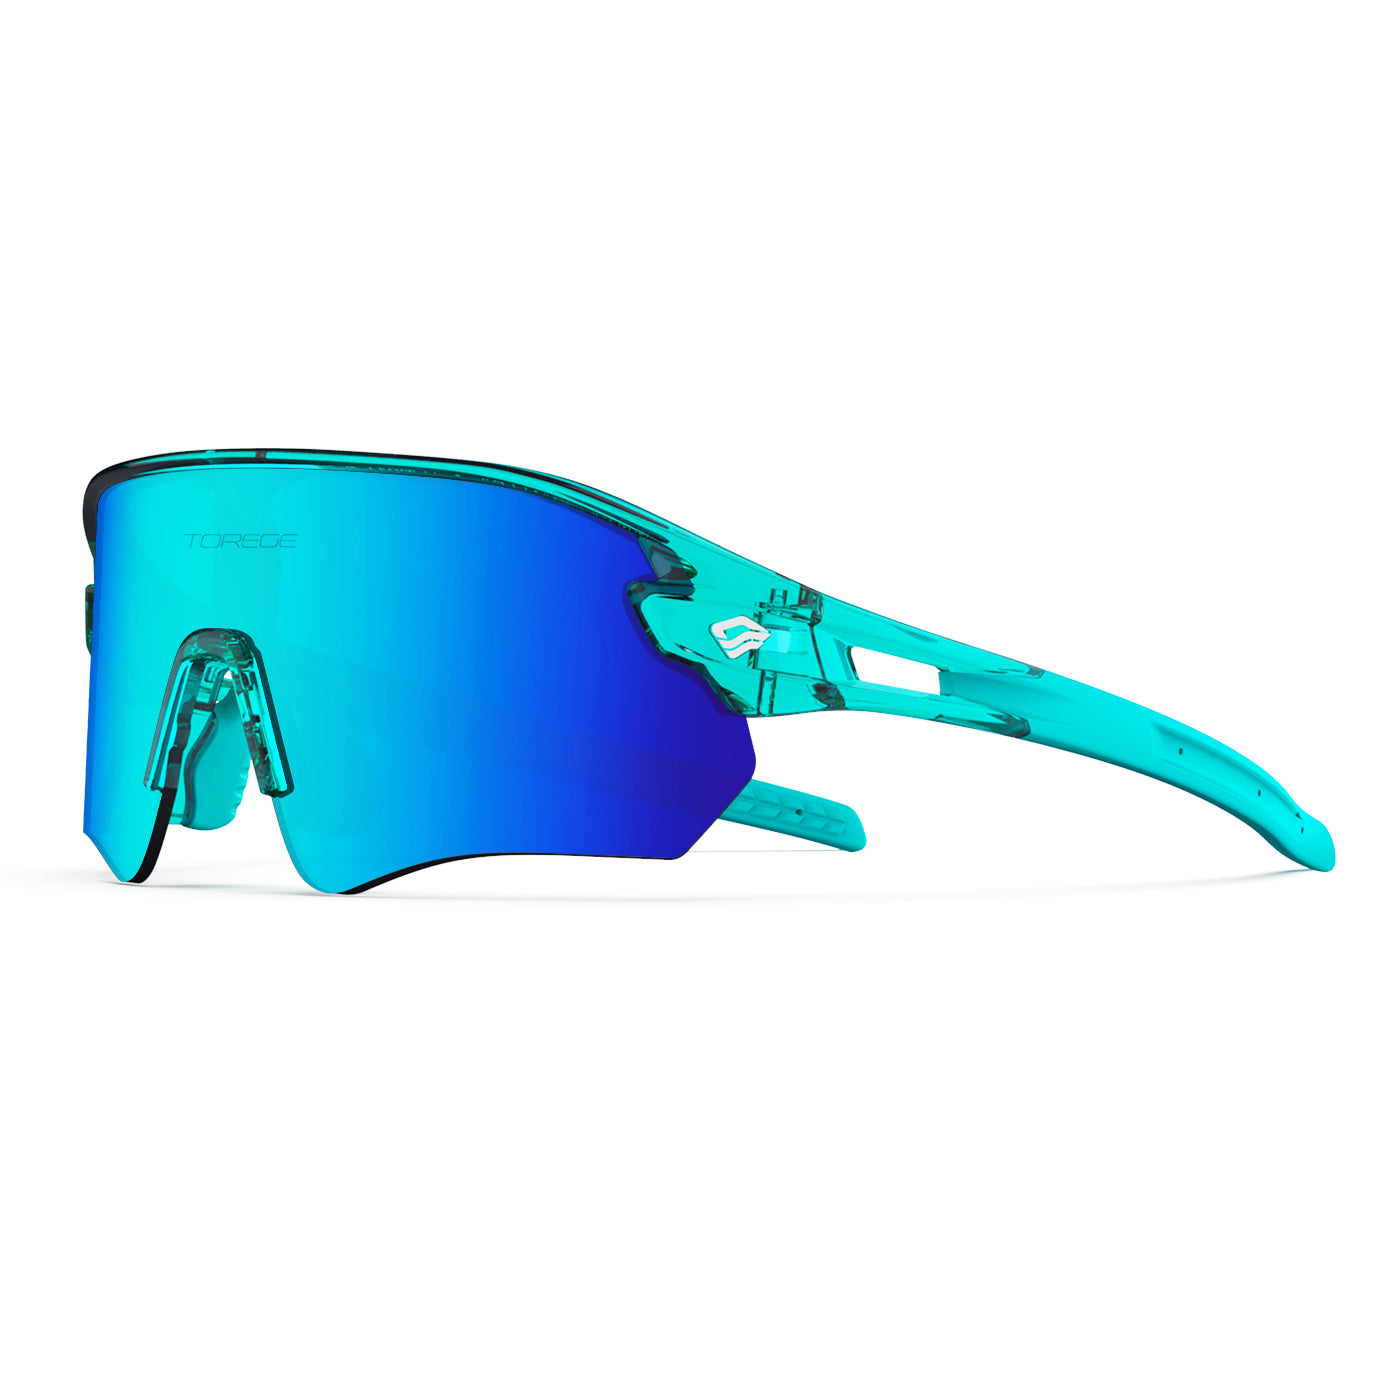 Frozen Sky Ultra Lightweight Sports Sunglasses for Men & Women with Lifetime Warranty - Ideal for Cycling, Hiking, Fishing, Golf & Running 